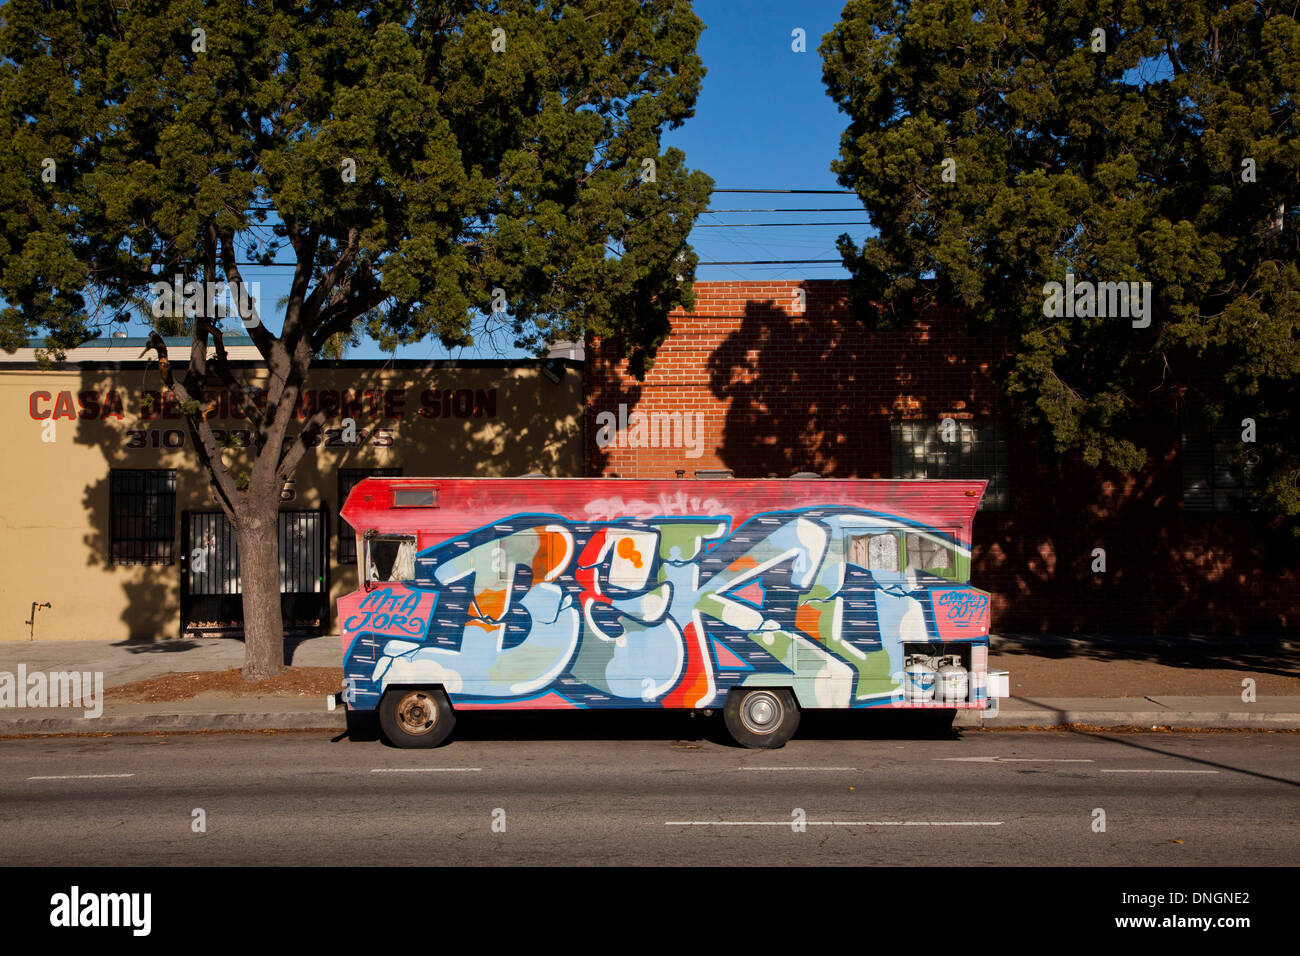 Recreational Vehicle with Grafitti, Los Angeles, California, United States of America Stock Photo